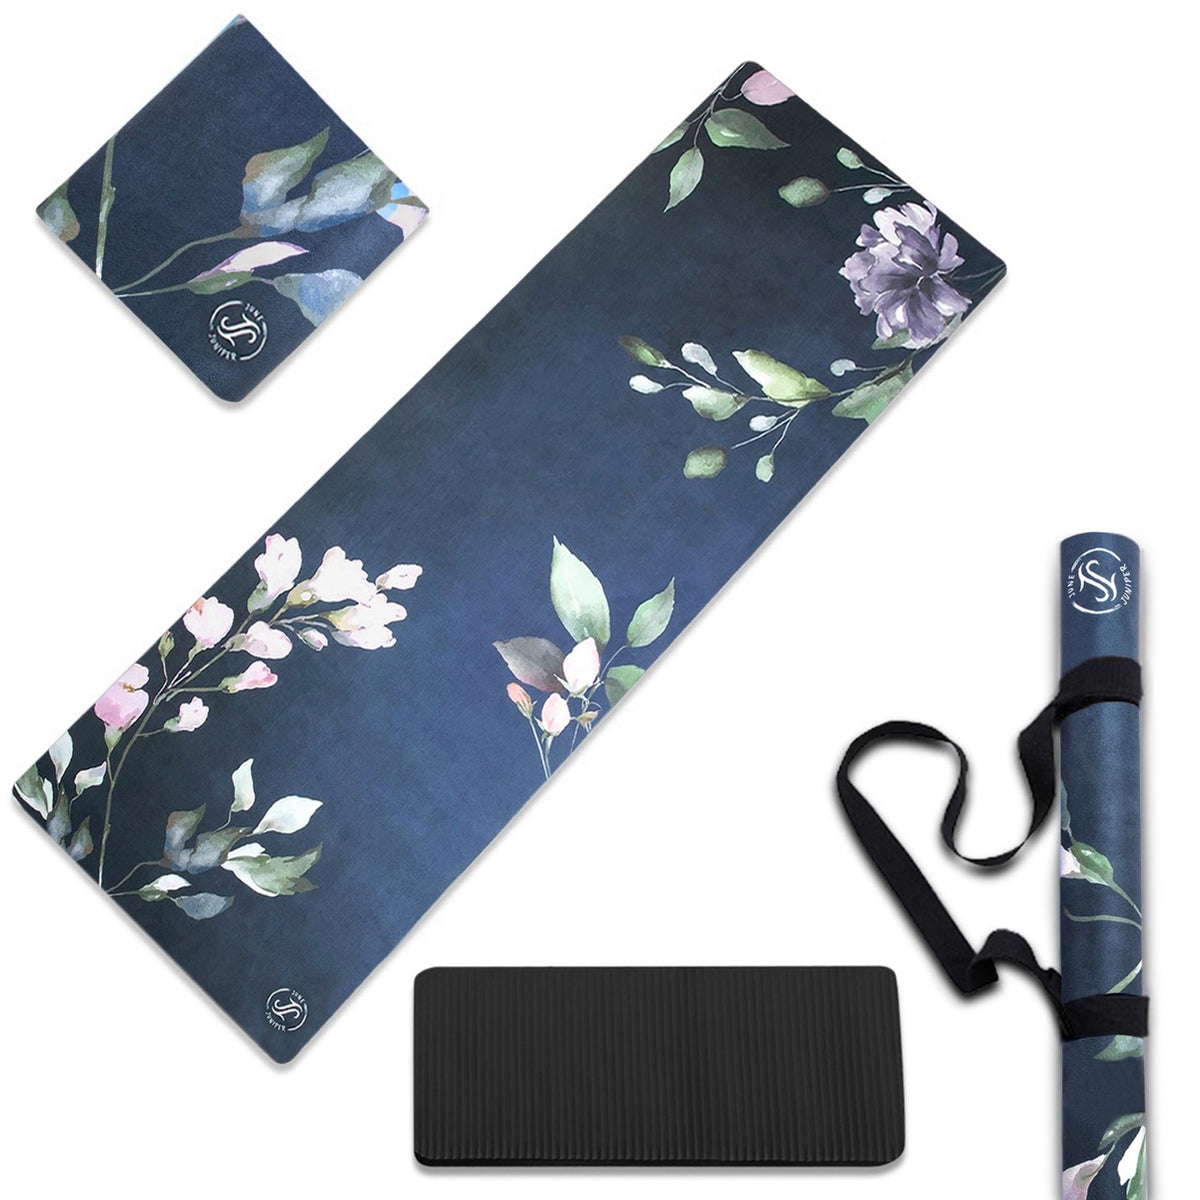 These Gorgeous Yoga Mat Holders Double as Home Décor